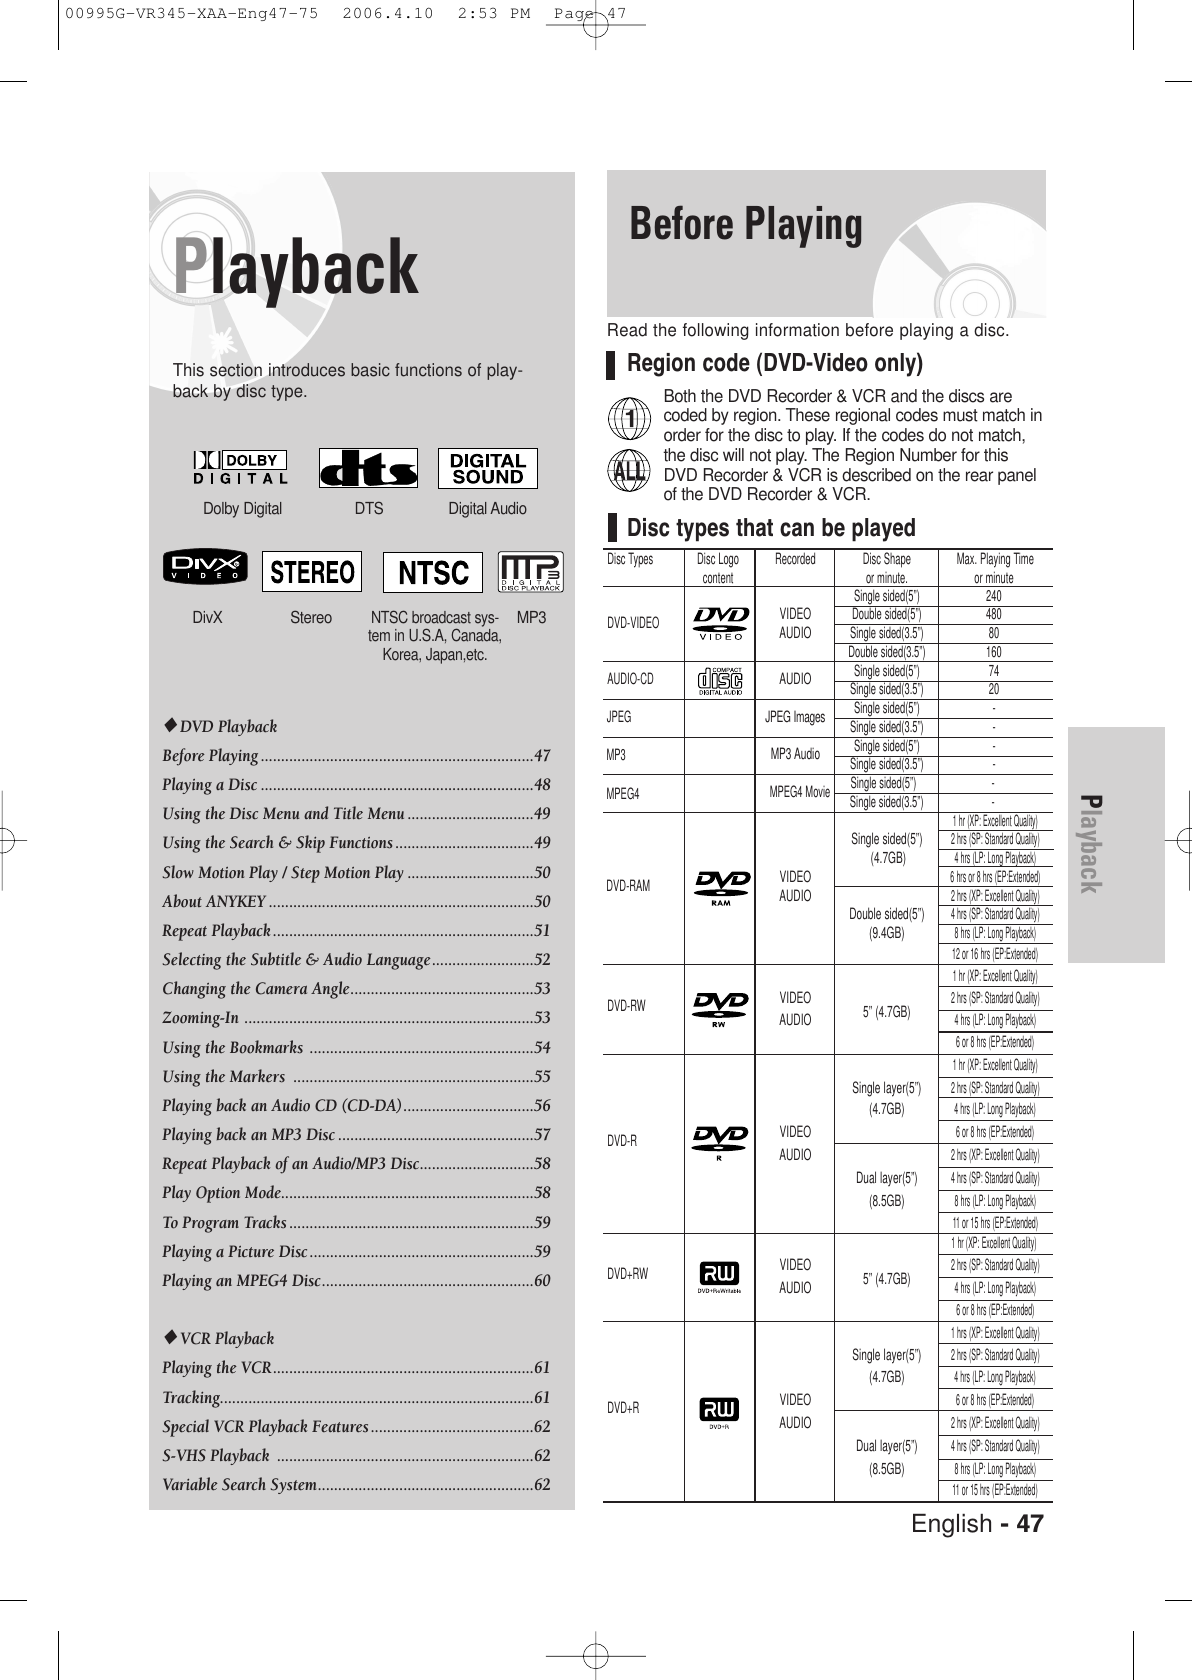 English - 47PlaybackPlaybackThis section introduces basic functions of play-back by disc type.Before PlayingRead the following information before playing a disc.Region code (DVD-Video only)Both the DVD Recorder &amp; VCR and the discs arecoded by region. These regional codes must match inorder for the disc to play. If the codes do not match,the disc will not play. The Region Number for thisDVD Recorder &amp; VCR is described on the rear panelof the DVD Recorder &amp; VCR.Disc types that can be playedDolby Digital DTS Digital AudioStereoDivX MP3NTSC broadcast sys-tem in U.S.A, Canada,Korea, Japan,etc.◆DVD PlaybackBefore Playing ...................................................................47Playing a Disc ...................................................................48Using the Disc Menu and Title Menu ...............................49Using the Search &amp; Skip Functions ..................................49Slow Motion Play / Step Motion Play ...............................50About ANYKEY .................................................................50Repeat Playback ................................................................51Selecting the Subtitle &amp; Audio Language.........................52 Changing the Camera Angle.............................................53Zooming-In .......................................................................53Using the Bookmarks  .......................................................54Using the Markers  ...........................................................55Playing back an Audio CD (CD-DA)................................56Playing back an MP3 Disc ................................................57Repeat Playback of an Audio/MP3 Disc............................58Play Option Mode..............................................................58To Program Tracks ............................................................59Playing a Picture Disc .......................................................59Playing an MPEG4 Disc....................................................60◆VCR PlaybackPlaying the VCR................................................................61Tracking.............................................................................61Special VCR Playback Features ........................................62S-VHS Playback  ...............................................................62Variable Search System.....................................................62Disc Types Disc Logo Recorded  Disc Shape Max. Playing Time    content or minute. or minuteSingle sided(5”) 240DVD-VIDEOVIDEODouble sided(5”) 480AUDIOSingle sided(3.5”) 80Double sided(3.5”) 160AUDIO-CDAUDIOSingle sided(5”) 74Single sided(3.5”) 20JPEG ImagesSingle sided(5”) -Single sided(3.5”) -MP3 AudioSingle sided(5”) -Single sided(3.5”) -MPEG4 Movie Single sided(5”) -Single sided(3.5”) -1 hr (XP: Excellent Quality)Single sided(5”)2 hrs (SP: Standard Quality)(4.7GB)4 hrs (LP: Long Playback)DVD-RAMVIDEO6 hrs or 8 hrs (EP:Extended)AUDIO2 hrs (XP: Excellent Quality)Double sided(5”)4 hrs (SP: Standard Quality)(9.4GB)8 hrs (LP: Long Playback)12 or 16 hrs (EP:Extended)1 hr (XP: Excellent Quality)DVD-RWVIDEO2 hrs (SP: Standard Quality)AUDIO 5” (4.7GB)4 hrs (LP: Long Playback)6 or 8 hrs (EP:Extended)1 hr (XP: Excellent Quality)Single layer(5”)2 hrs (SP: Standard Quality)(4.7GB)4 hrs (LP: Long Playback)DVD-RVIDEO6 or 8 hrs (EP:Extended)AUDIO2 hrs (XP: Excellent Quality)Dual layer(5”)4 hrs (SP: Standard Quality)(8.5GB)8 hrs (LP: Long Playback)11 or 15 hrs (EP:Extended)1 hr (XP: Excellent Quality)DVD+RWVIDEO2 hrs (SP: Standard Quality)AUDIO 5” (4.7GB)4 hrs (LP: Long Playback)6 or 8 hrs (EP:Extended)1 hrs (XP: Excellent Quality)Single layer(5”)2 hrs (SP: Standard Quality)(4.7GB)4 hrs (LP: Long Playback)DVD+RVIDEO6 or 8 hrs (EP:Extended)AUDIO2 hrs (XP: Excellent Quality)Dual layer(5”)4 hrs (SP: Standard Quality)(8.5GB)8 hrs (LP: Long Playback)11 or 15 hrs (EP:Extended)JPEGMP3MPEG400995G-VR345-XAA-Eng47-75  2006.4.10  2:53 PM  Page 47